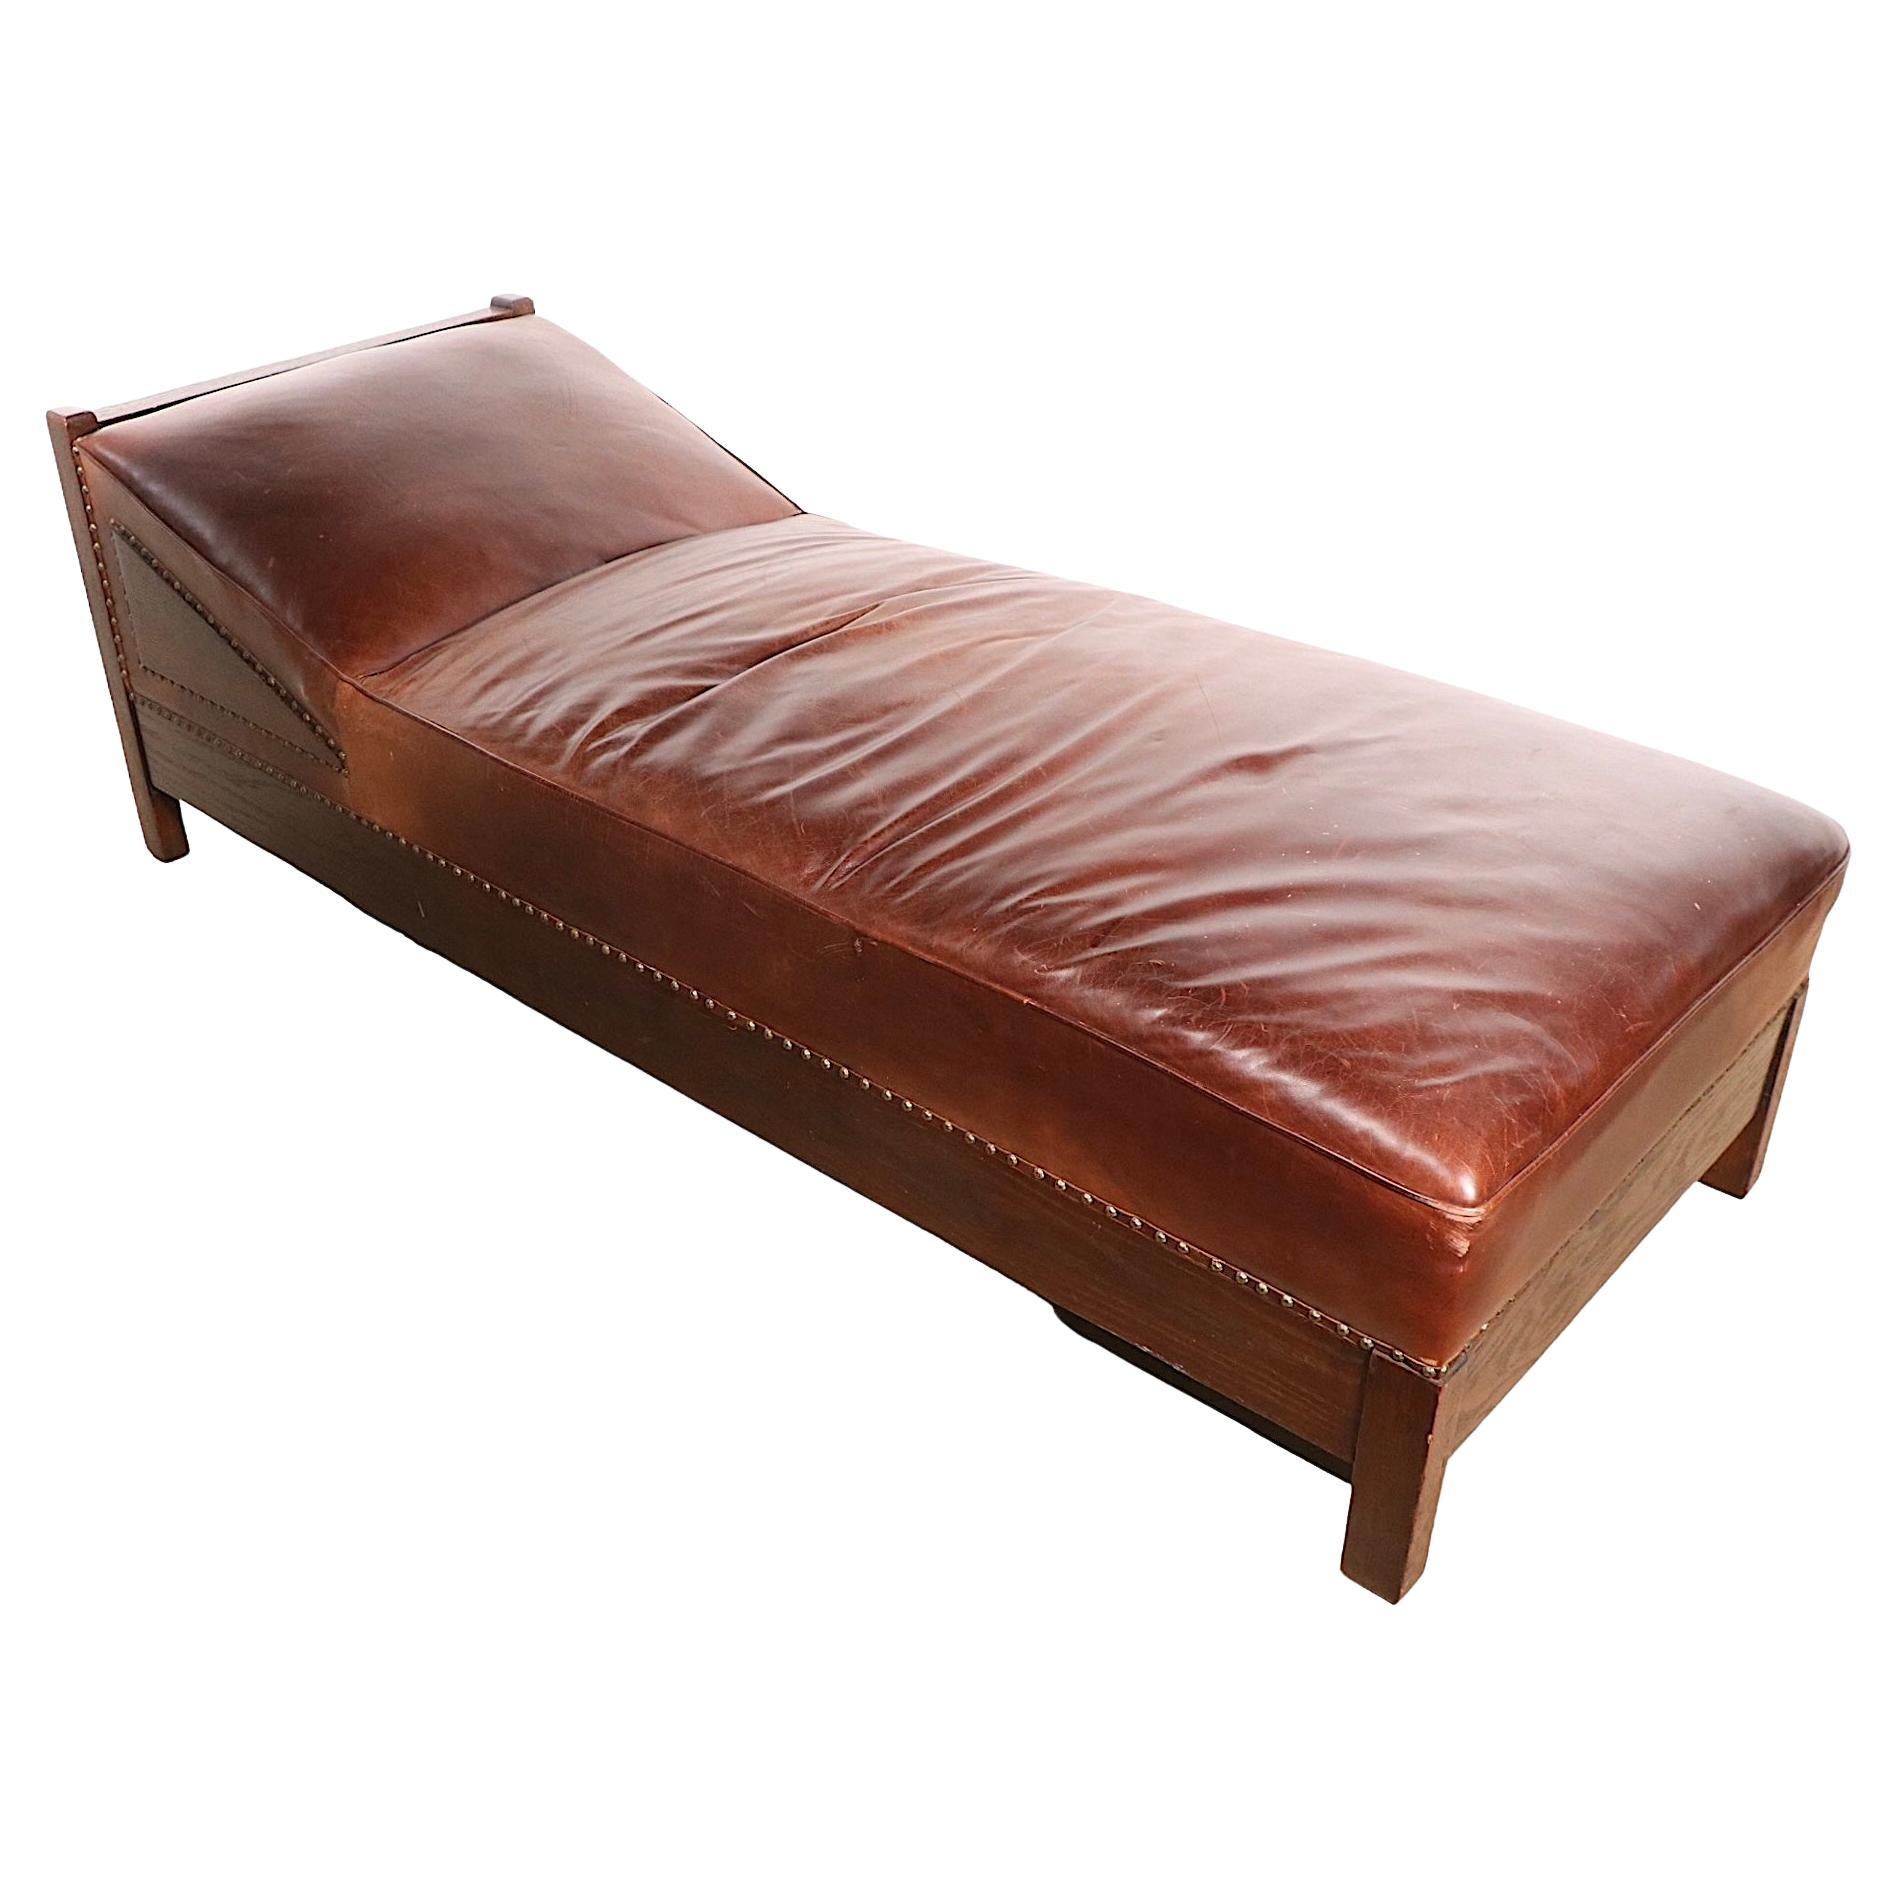 Oak and Leather Arts and Crafts Mission Daybed Chaise Lounge c. 1900 -1920's